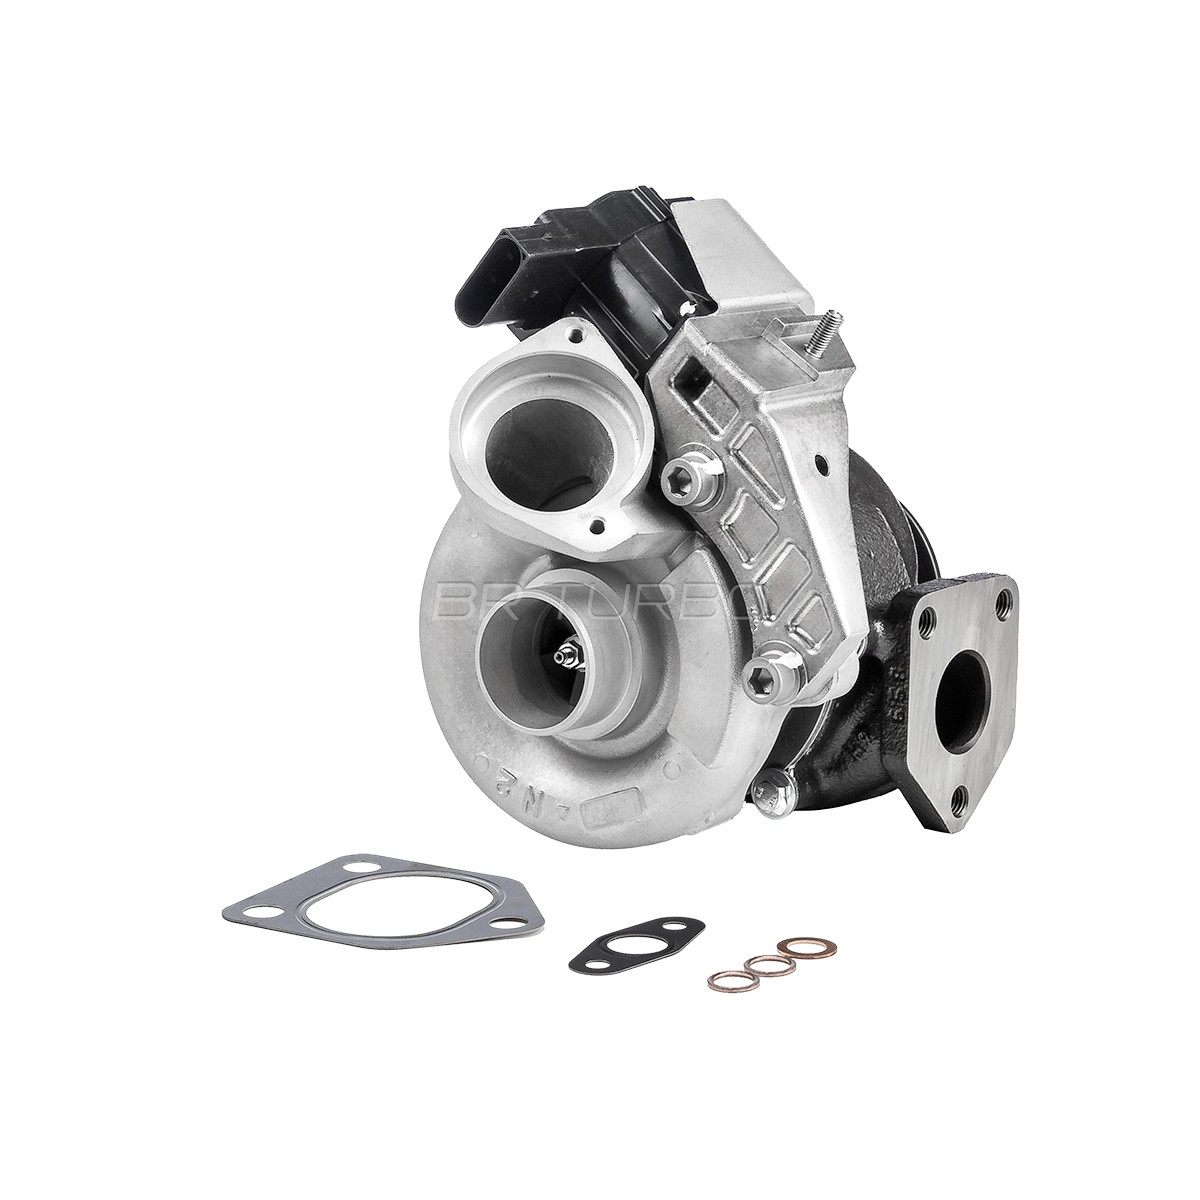 49S3505761RSG Turbocharger REMANUFACTURED TURBOCHARGER WITH GASKET KIT BR Turbo 49S3505761RSG review and test